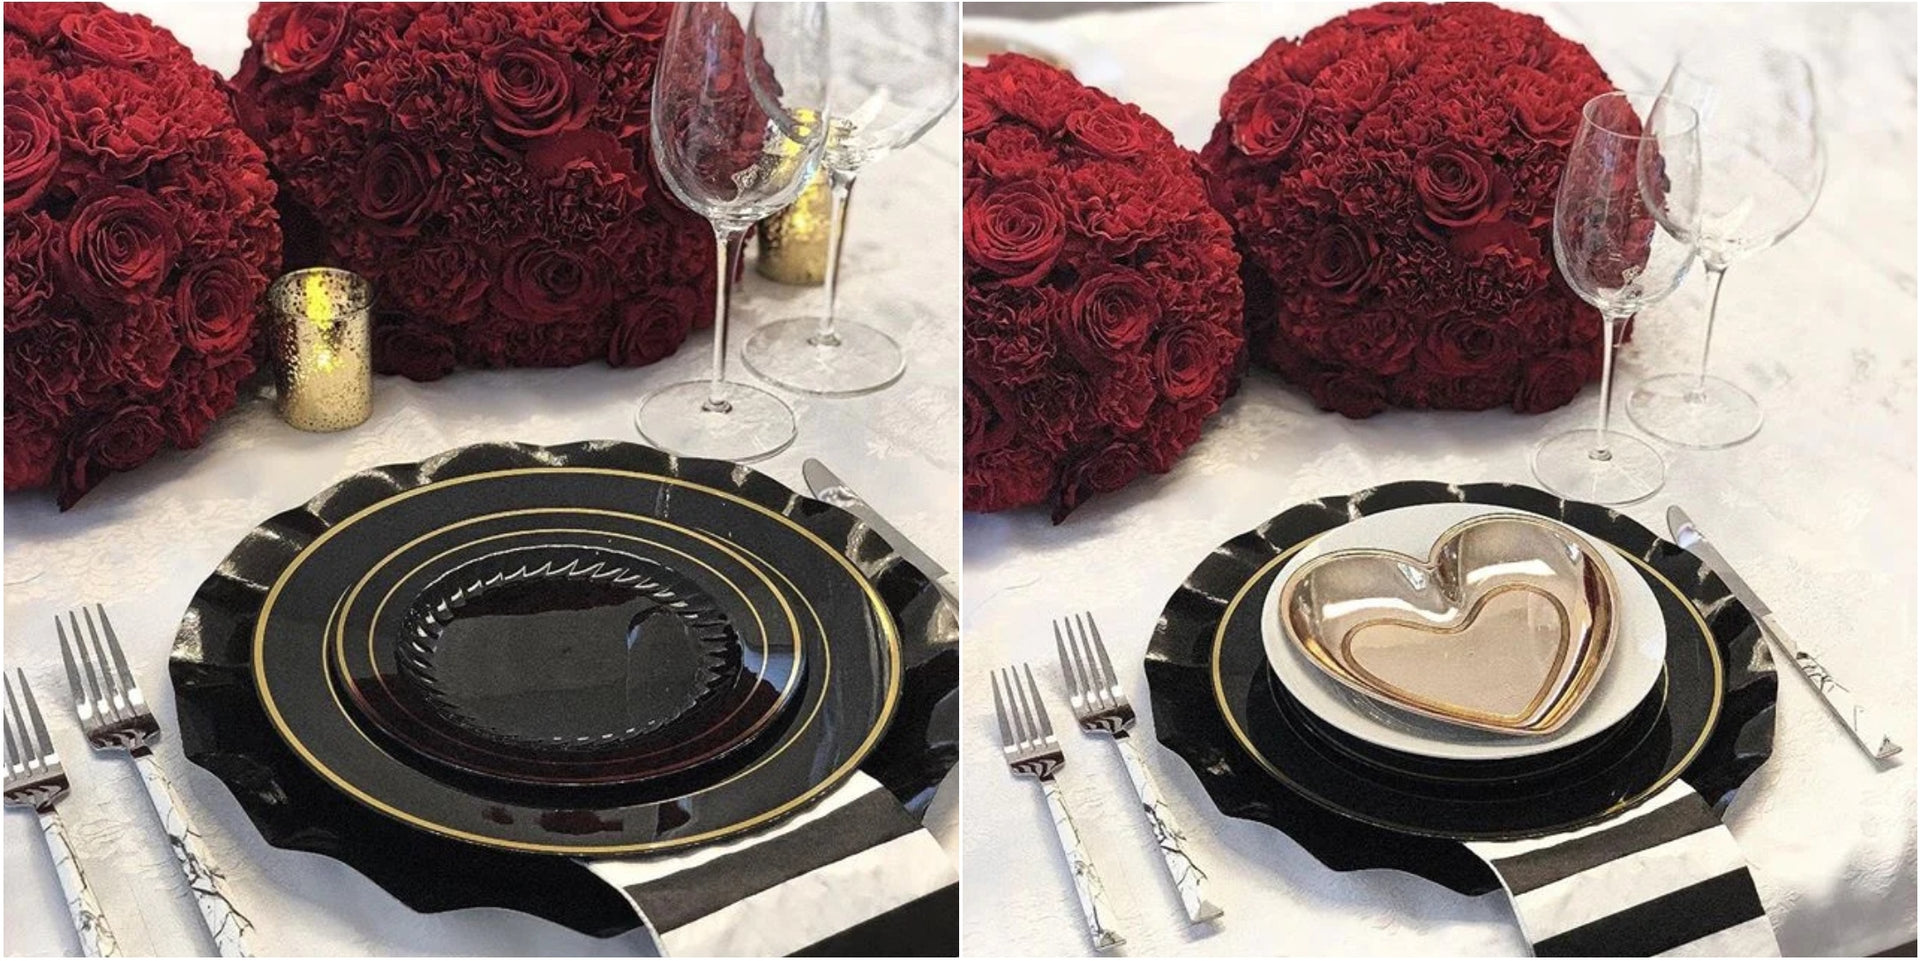 Dining in Love: Elegant Valentine's Day Tablescape Ideas